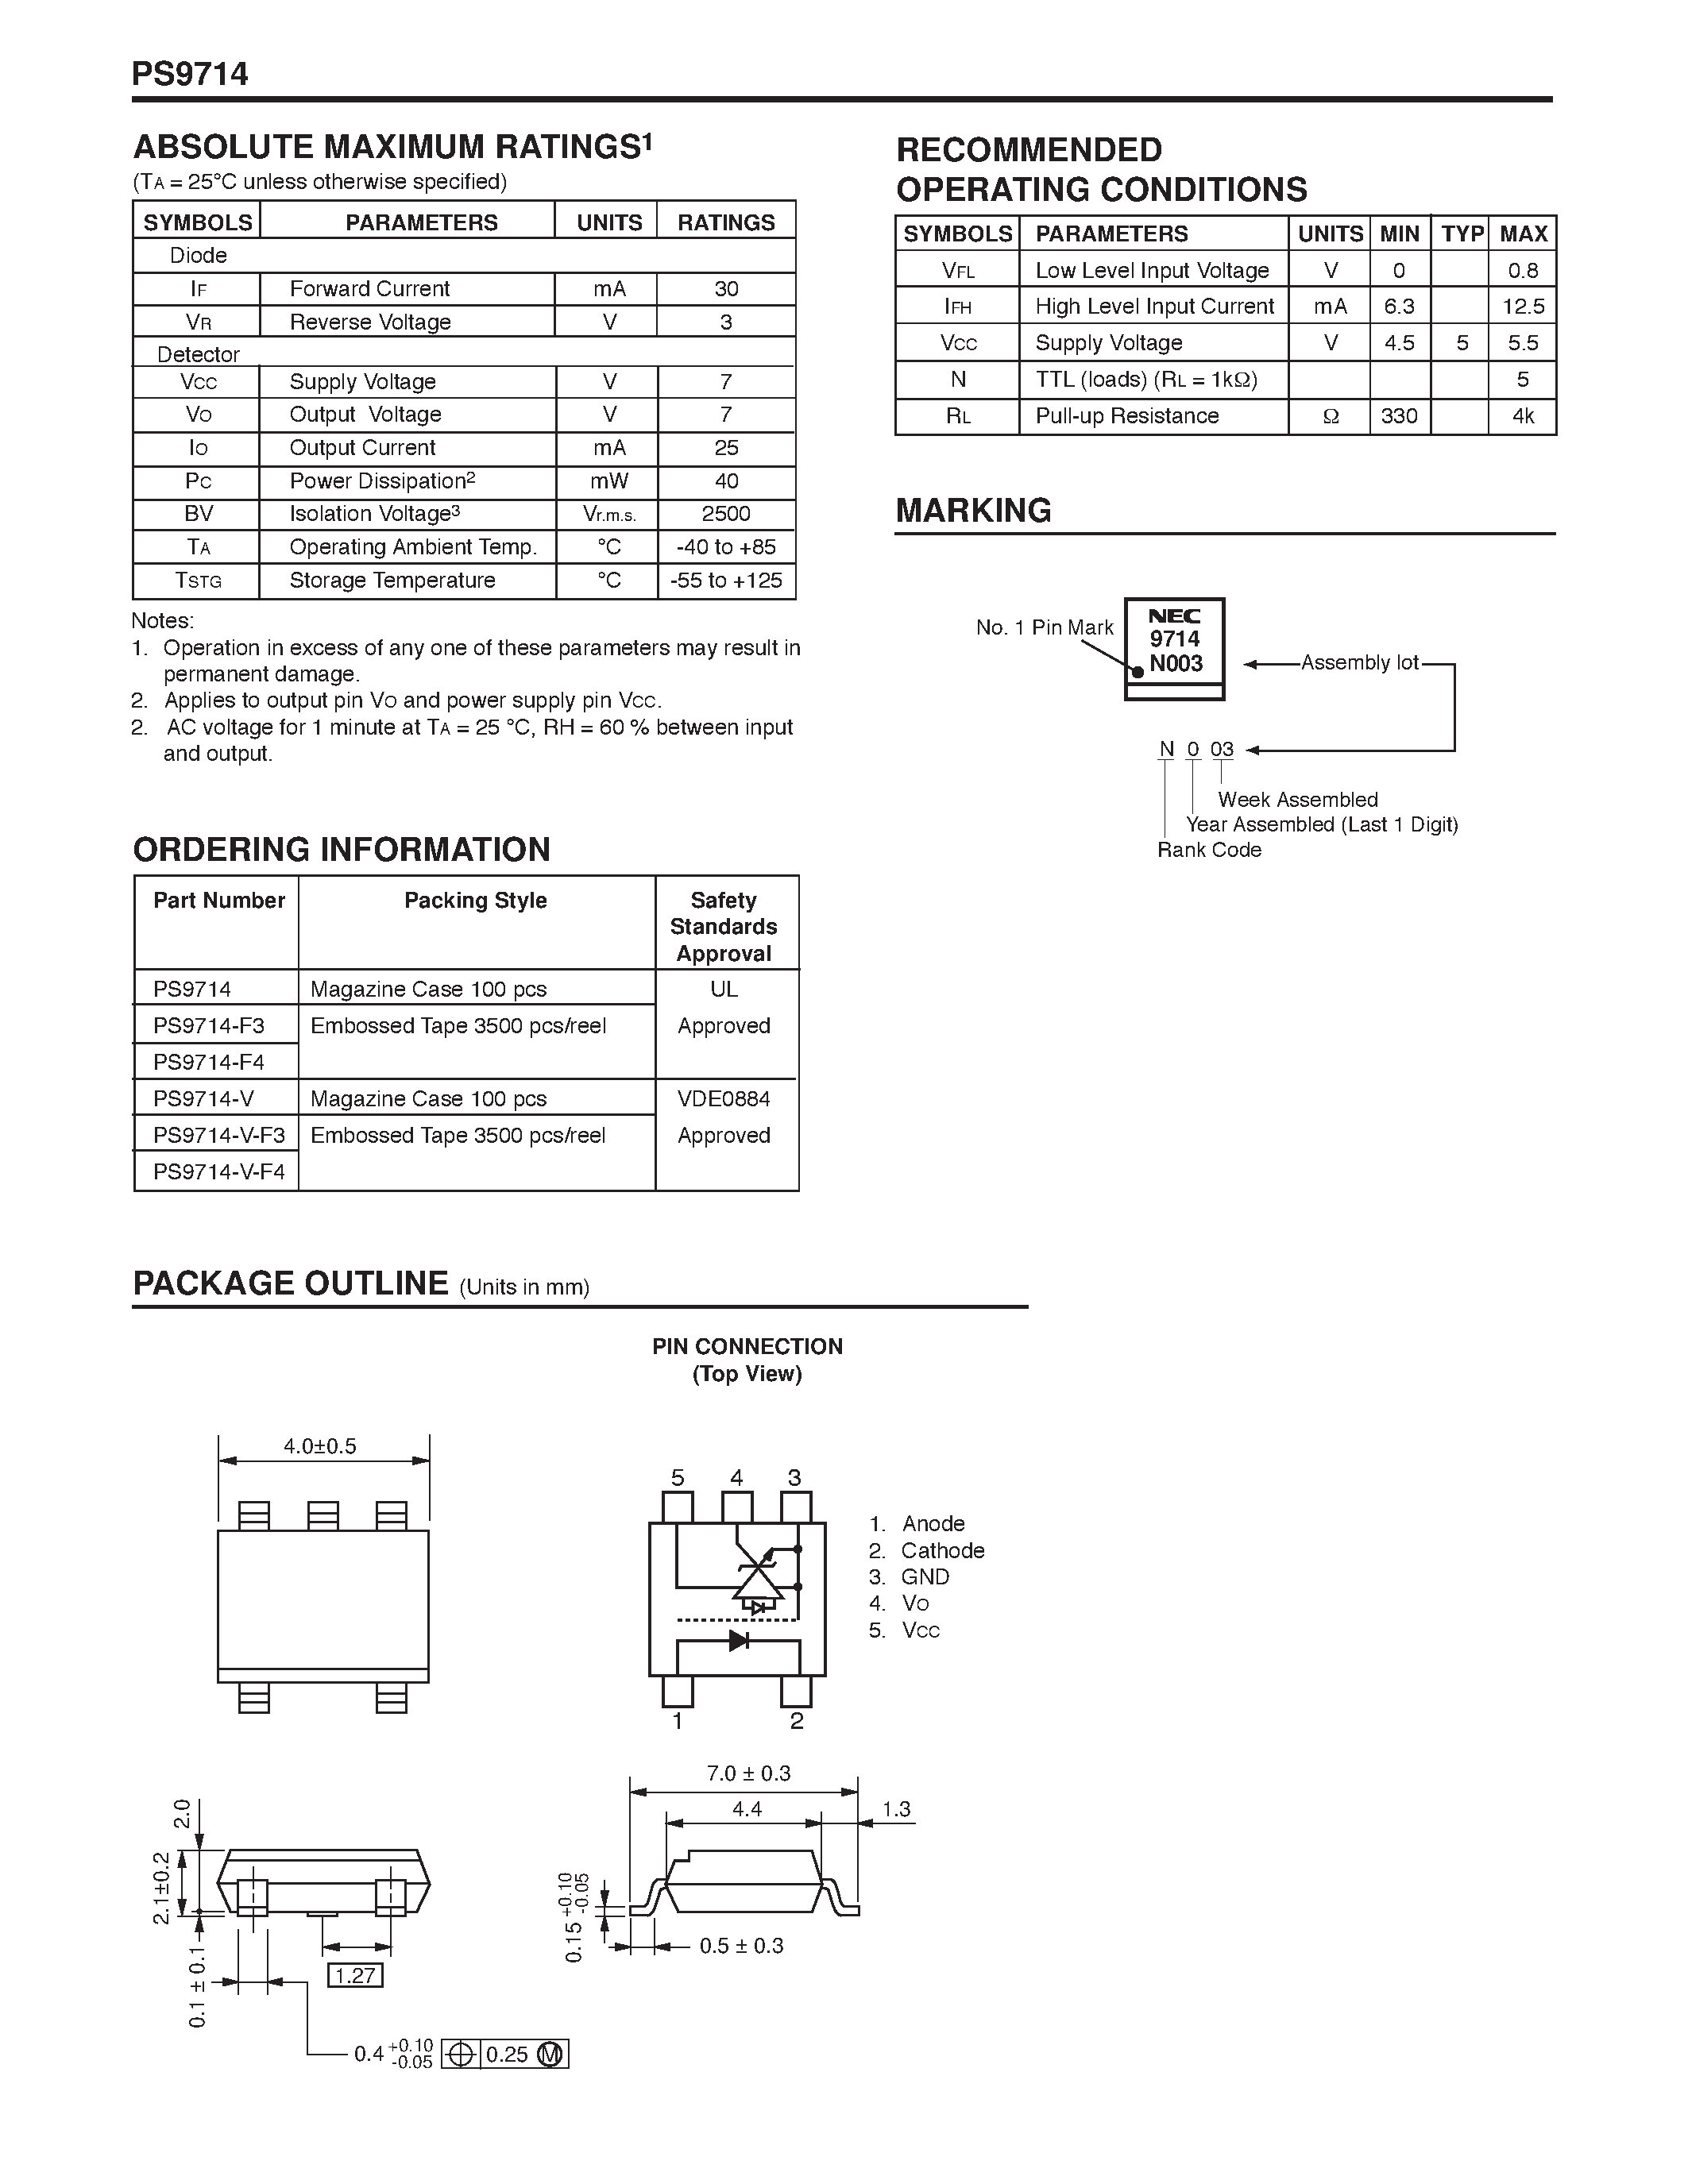 Datasheet PS9714-V-F3 - NECs HIGH CMR / 10 Mbps OPEN COLLECTOR OUTPUT TYPE 5 PIN SOP OPTOCOUPLER page 2